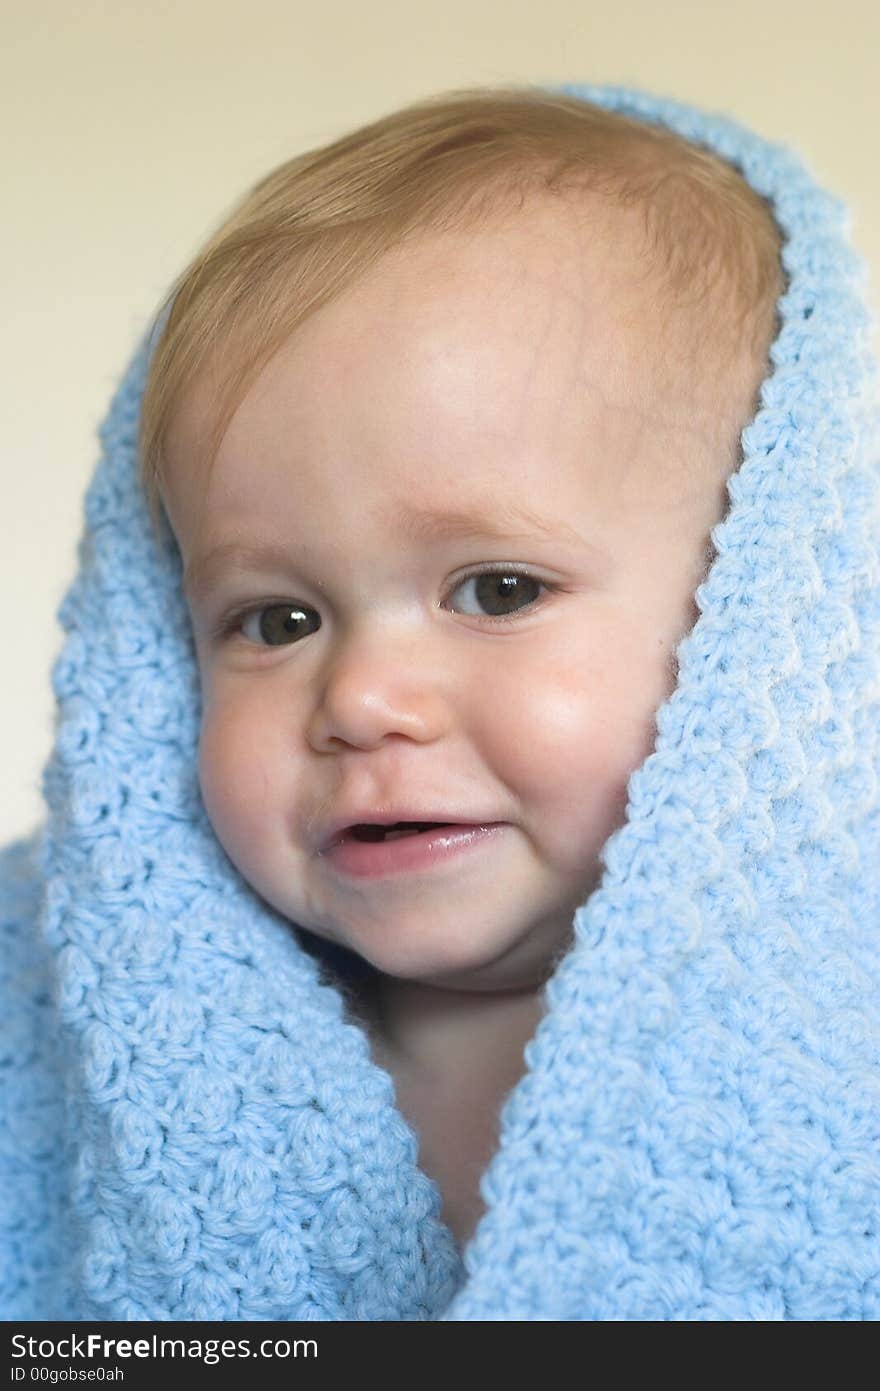 Image of a cute toddler peeking out from under a blanket. Image of a cute toddler peeking out from under a blanket